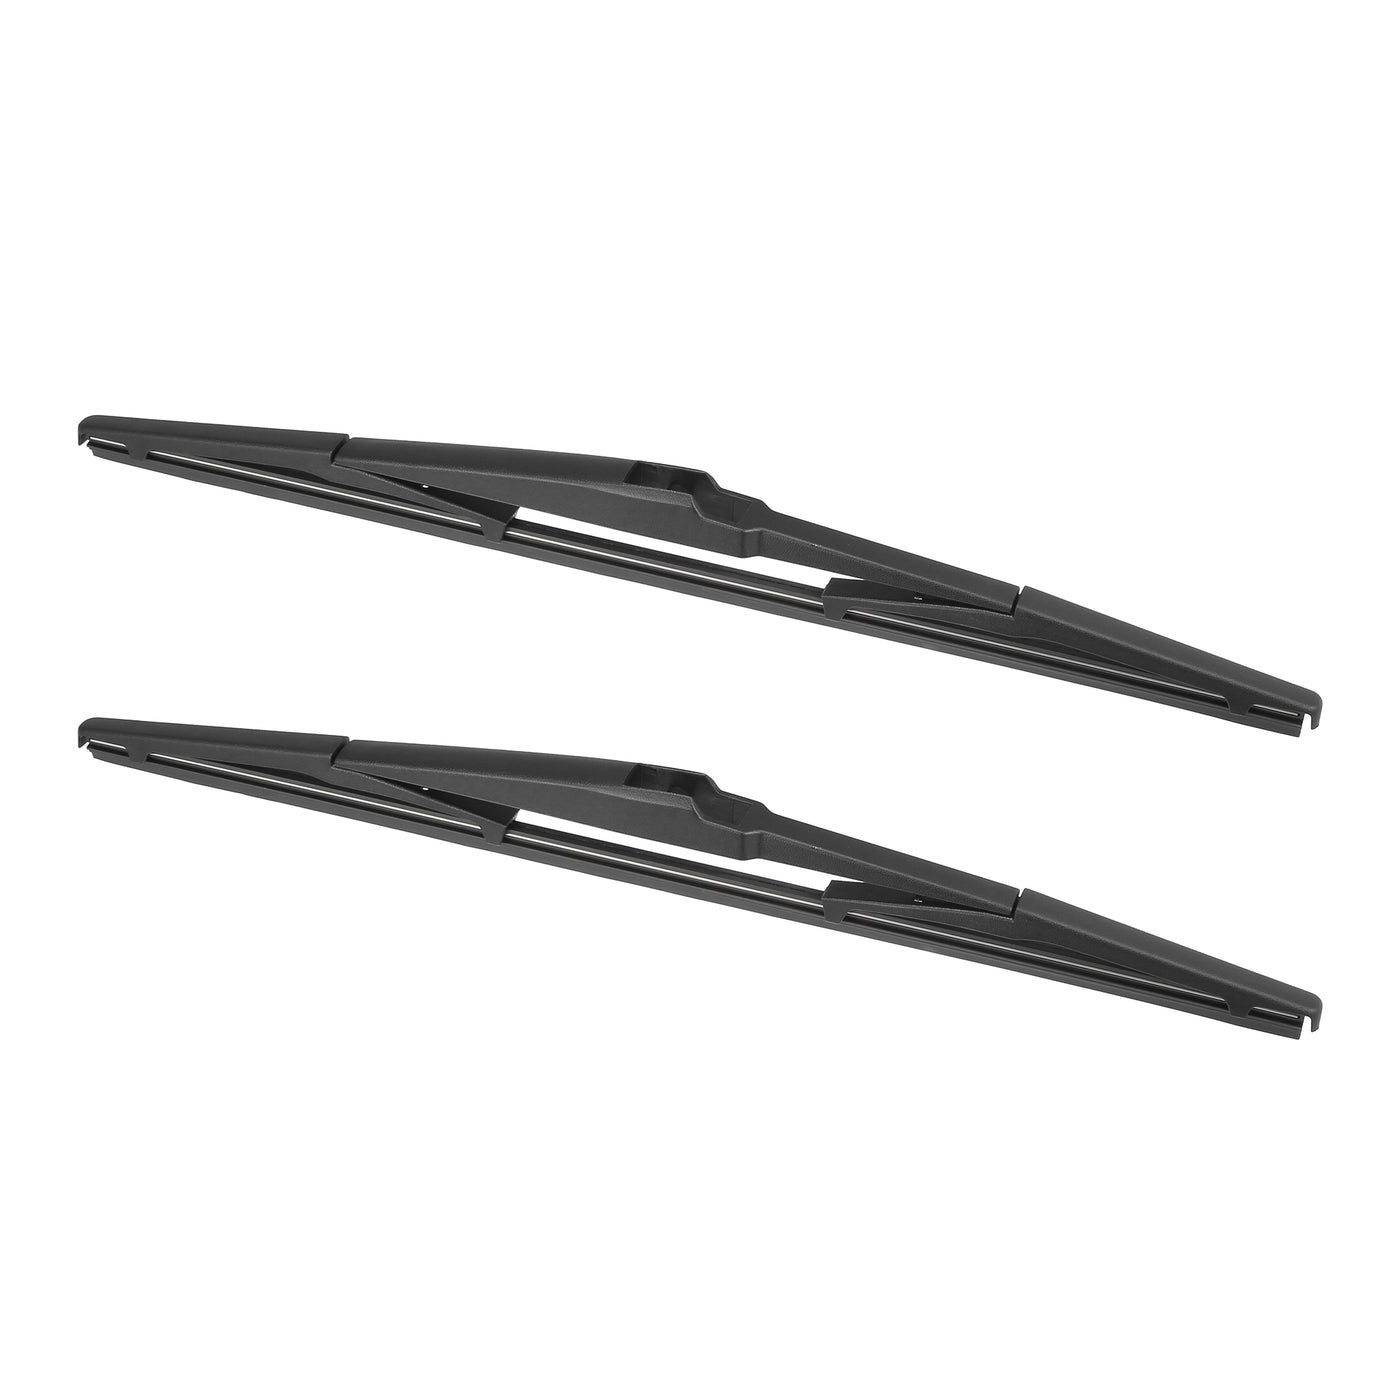 X AUTOHAUX 2pcs Rear Windshield Wiper Blade Replacement for Hyundai Santa Fe 2006-2012 for Kia Carens 2006-2012 for Mazda CX-5 2011-2019